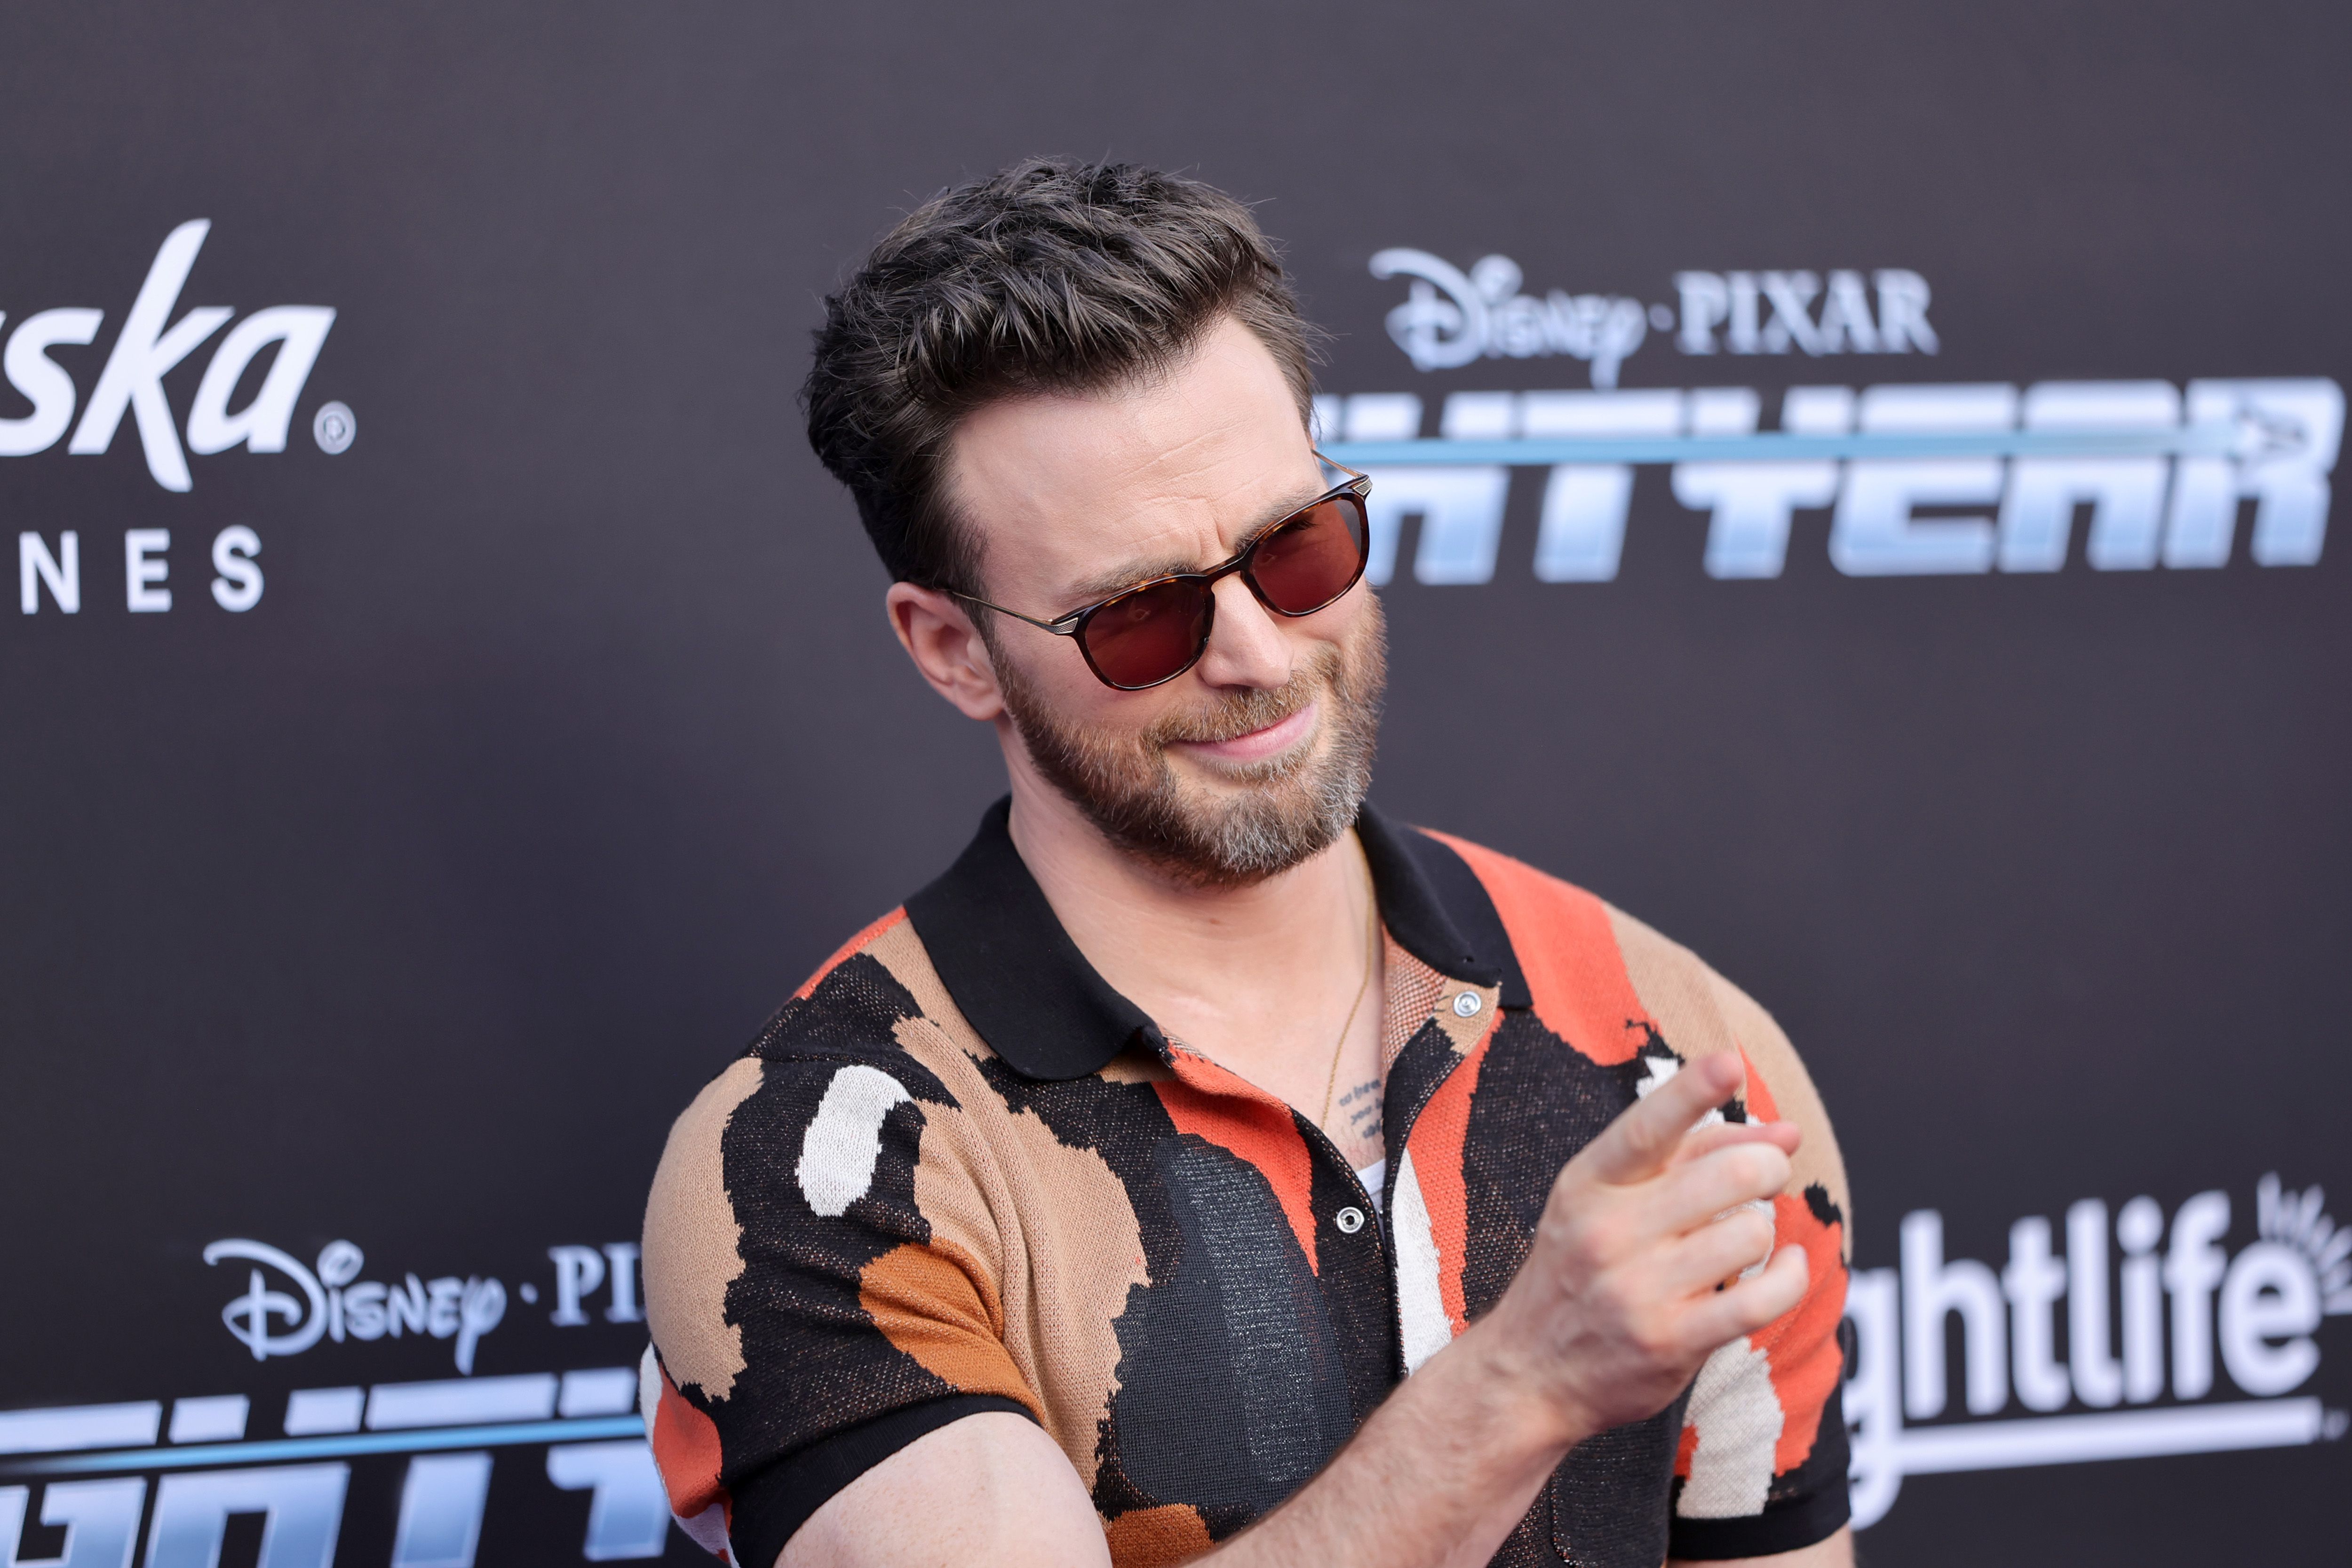 Chris Evans attends the premiere of the Disney and Pixar movie Lightyear at the El Capitan Theatre